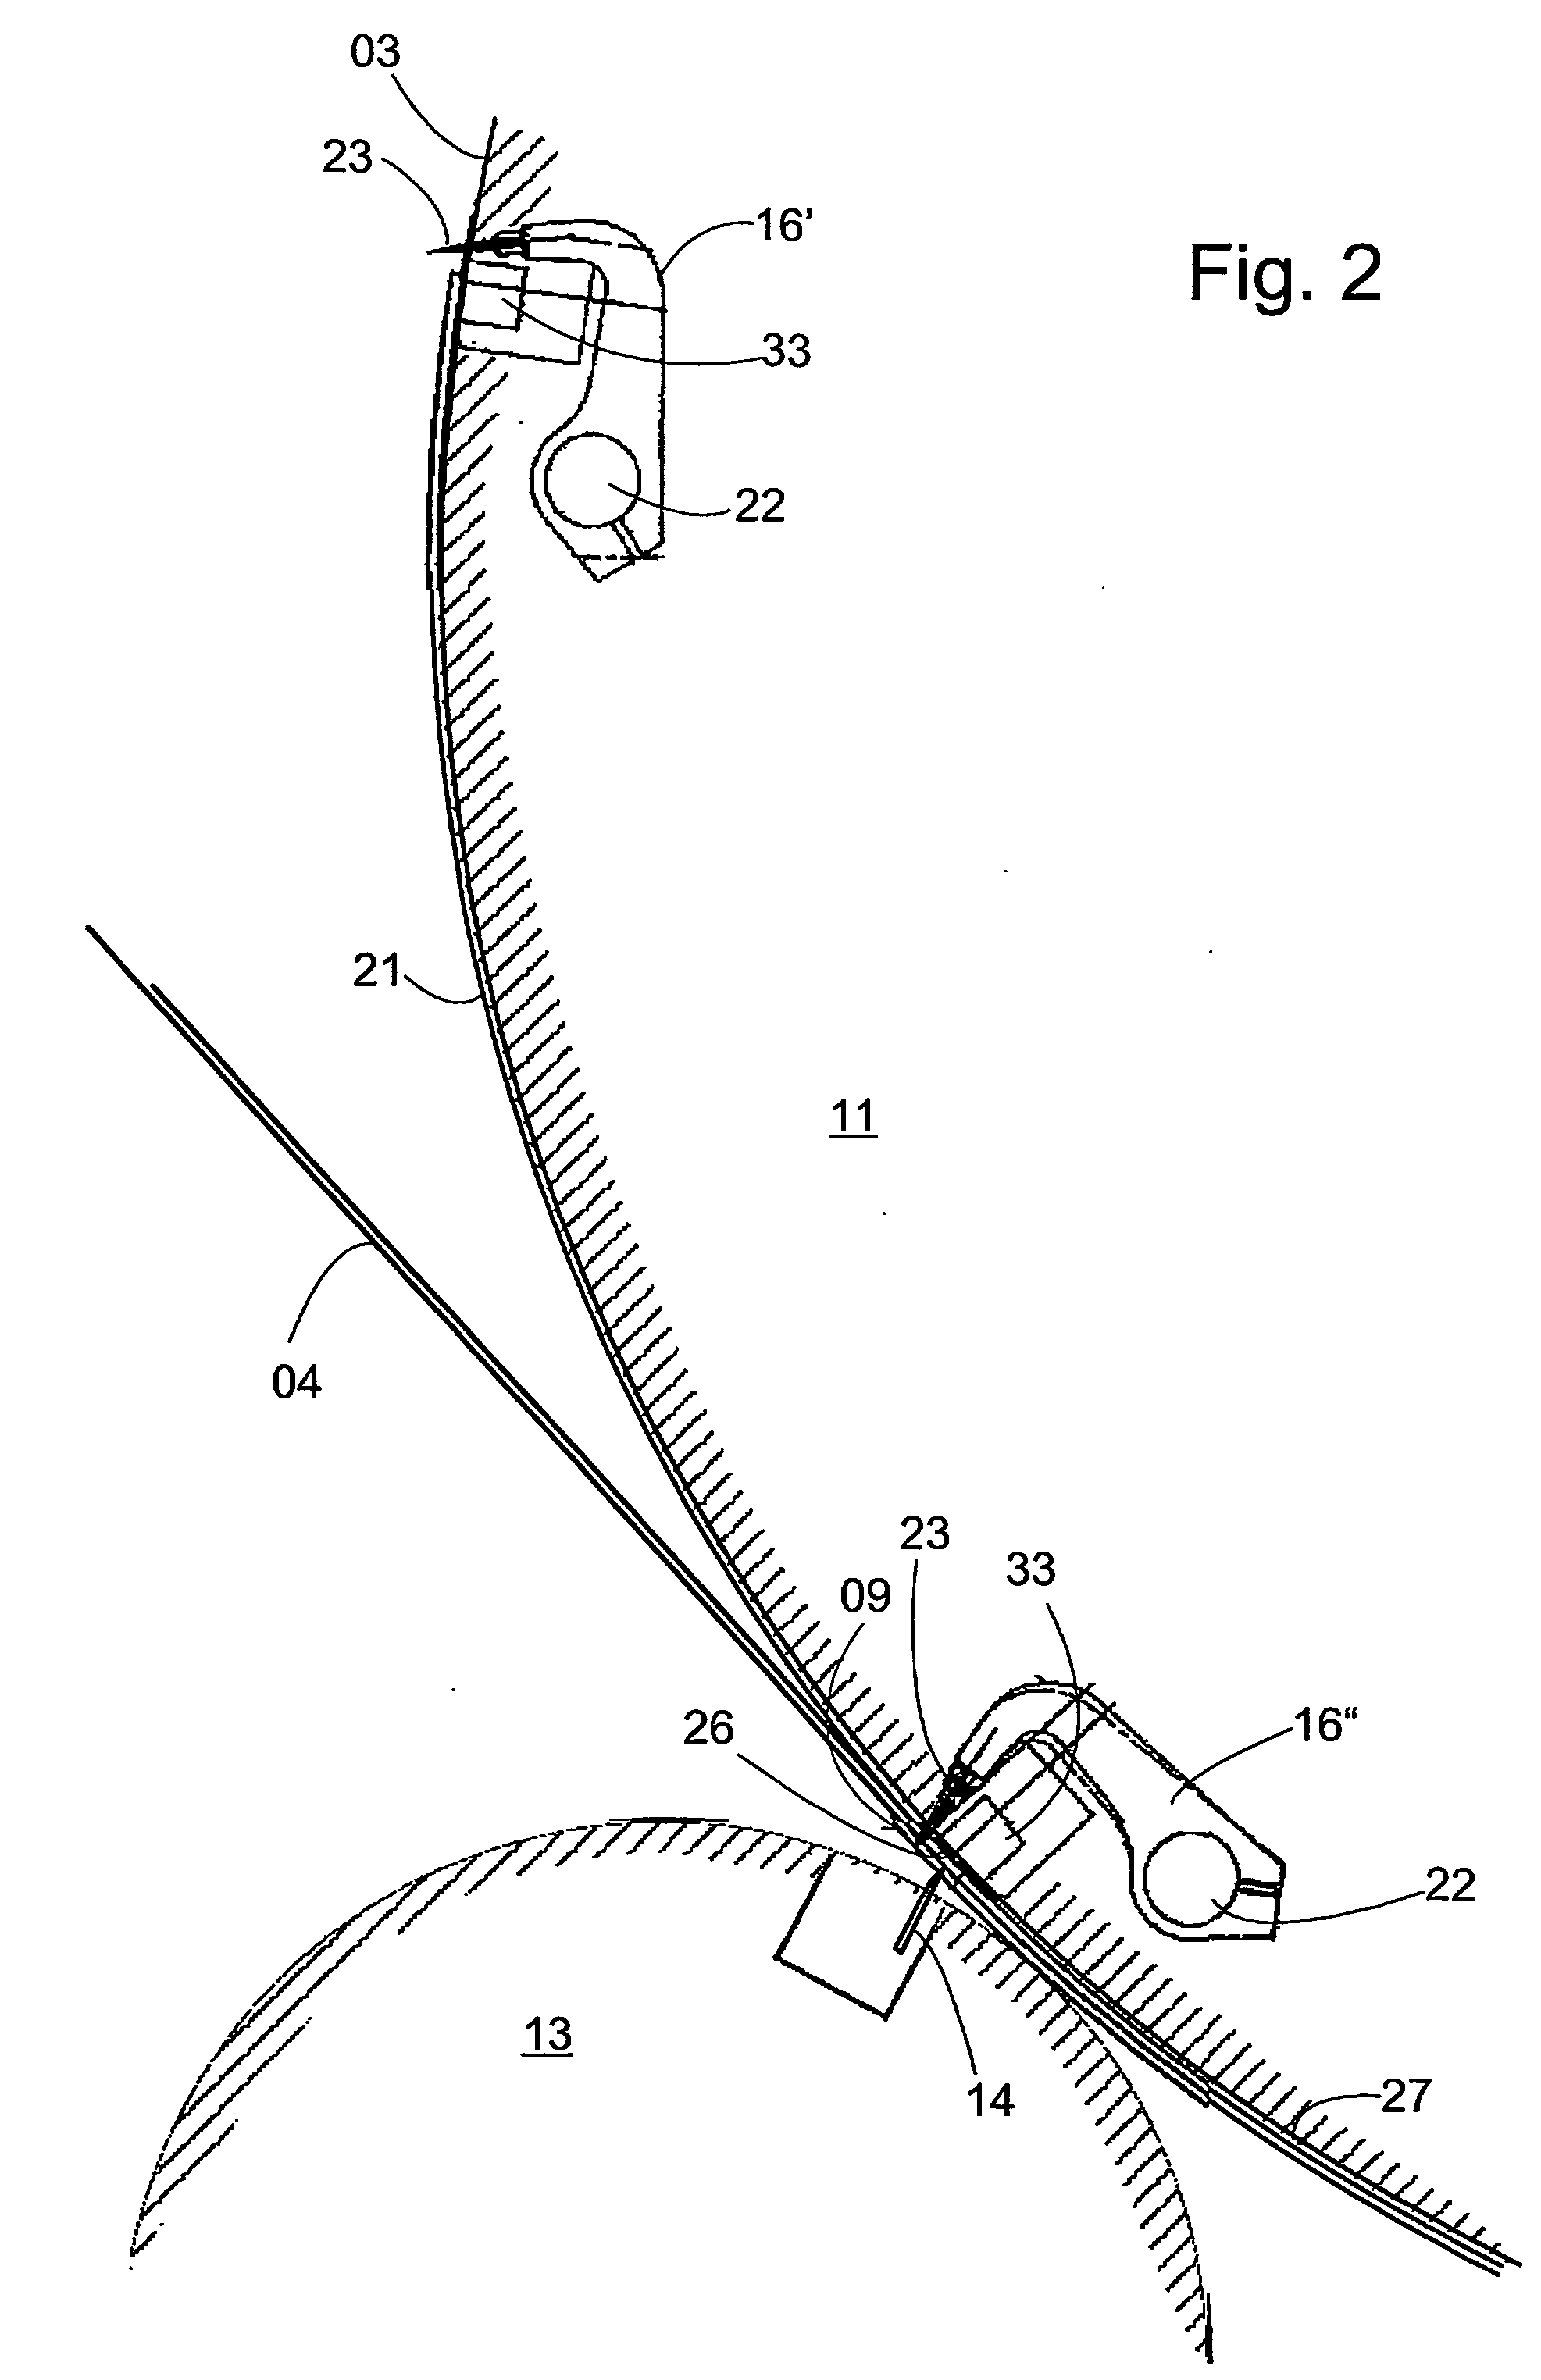 Rotary folder comprising a cutting device for cross-cutting at least one web